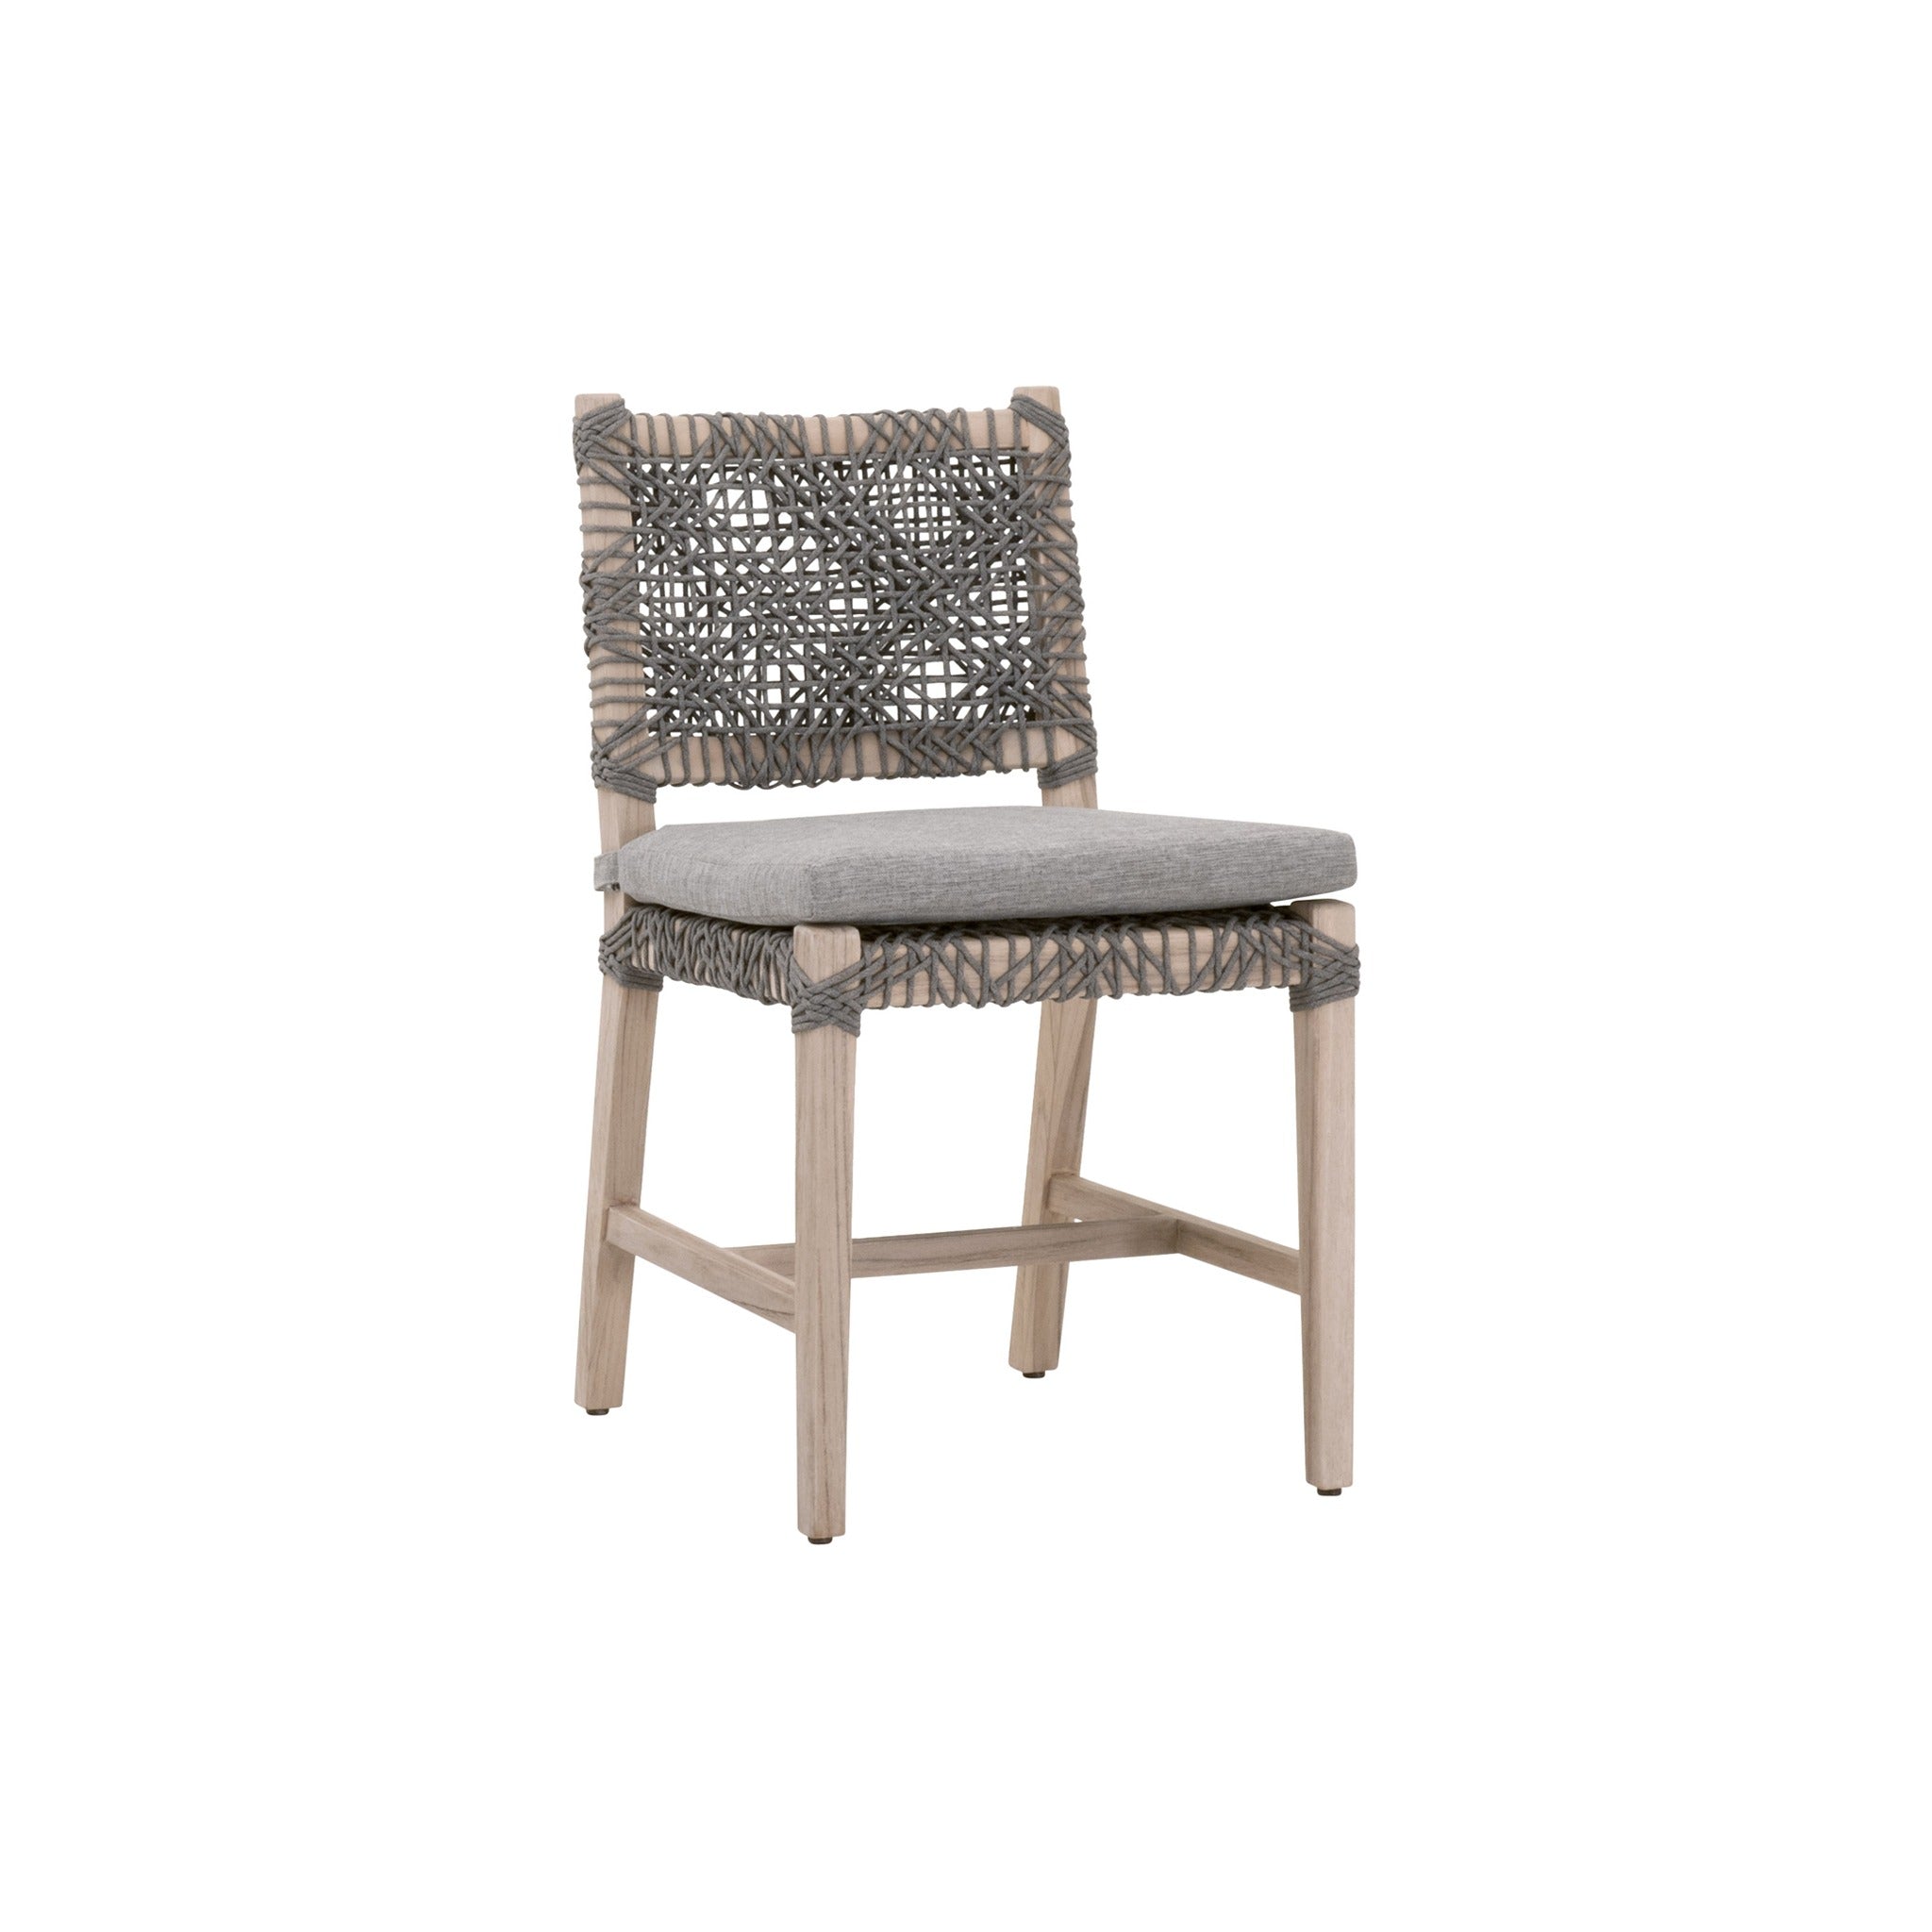 Clovelly Outdoor Dining Chair, set of 2